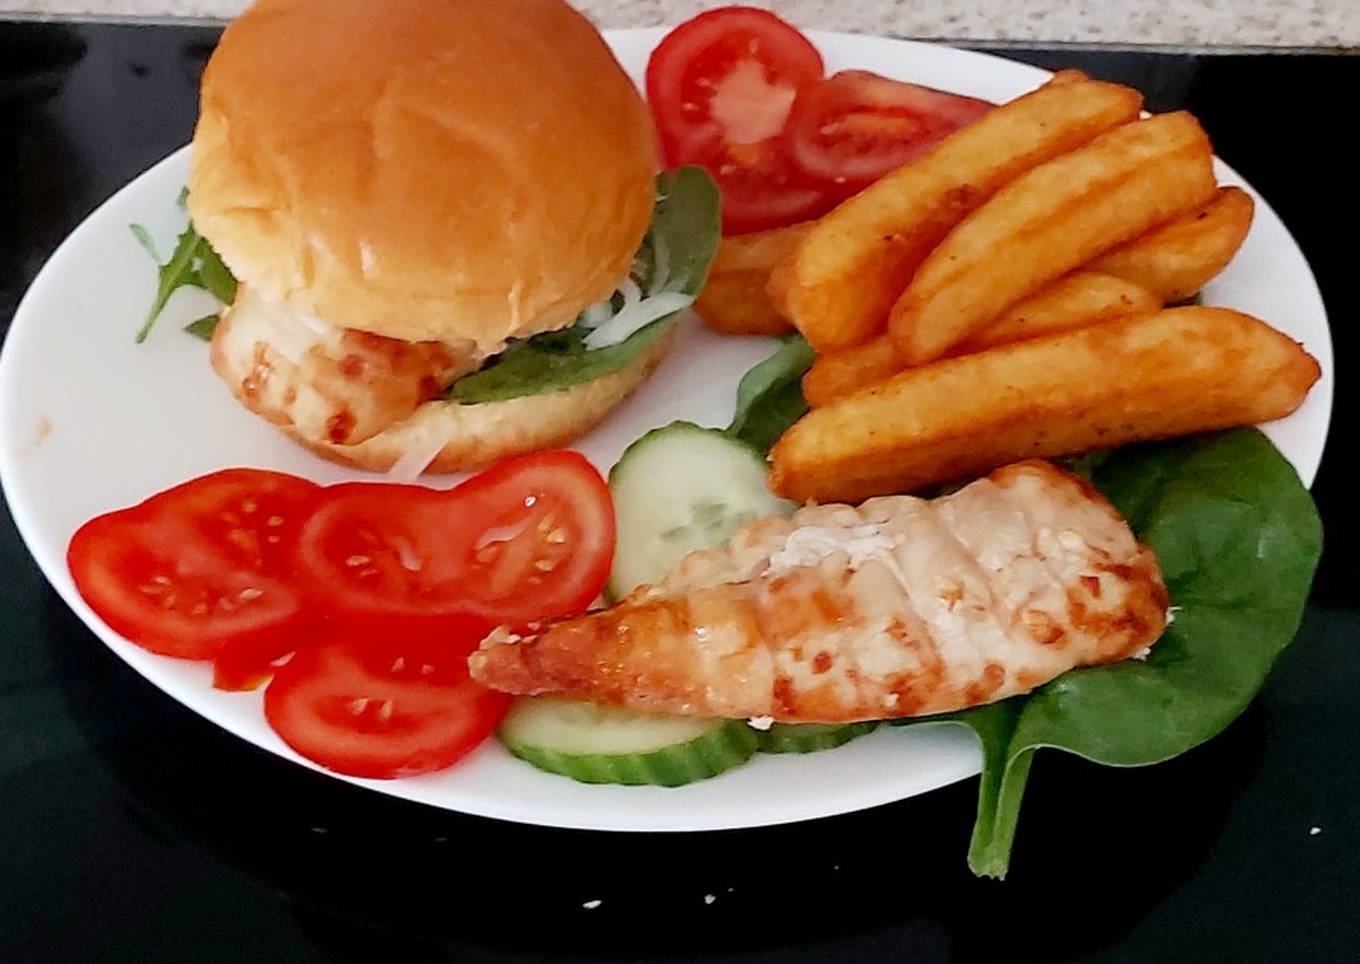 my roast chicken burger with homemade chips and salad